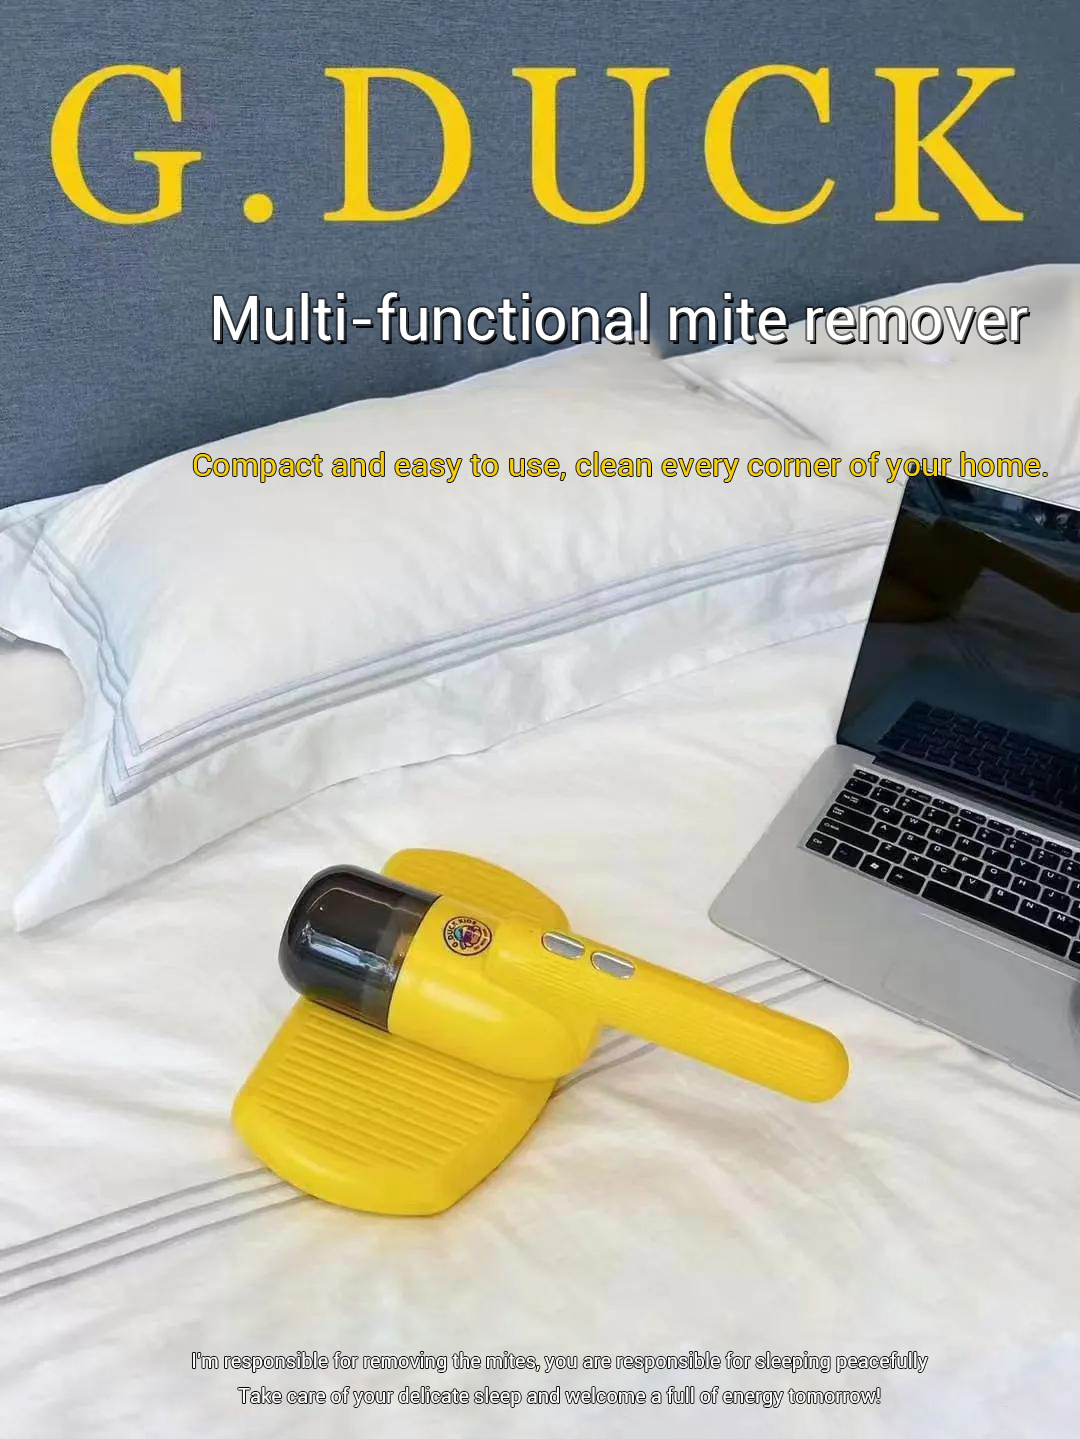 Multifunctional mite removal instrument